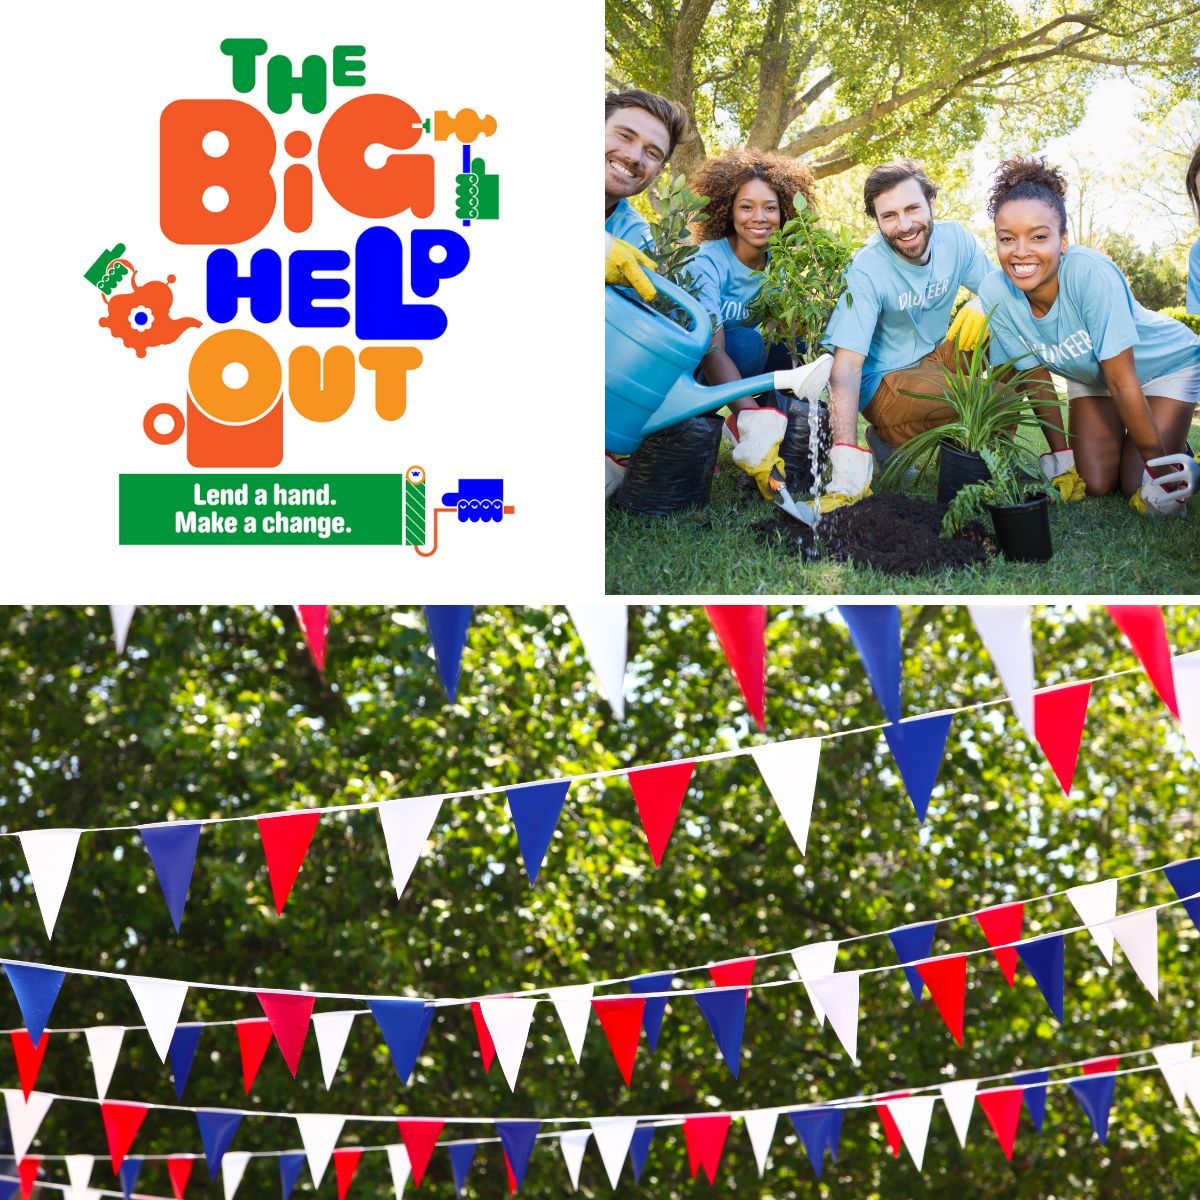 If you're looking for a charity or cause to support for the #bigHelpOut on Mon 8 May, check our Community Noticeboard for current #volunteering opportunities. You may be surprised at the range of roles available near you!
bit.ly/43OXq4X
#BrumVolunteers #MakeaDifference